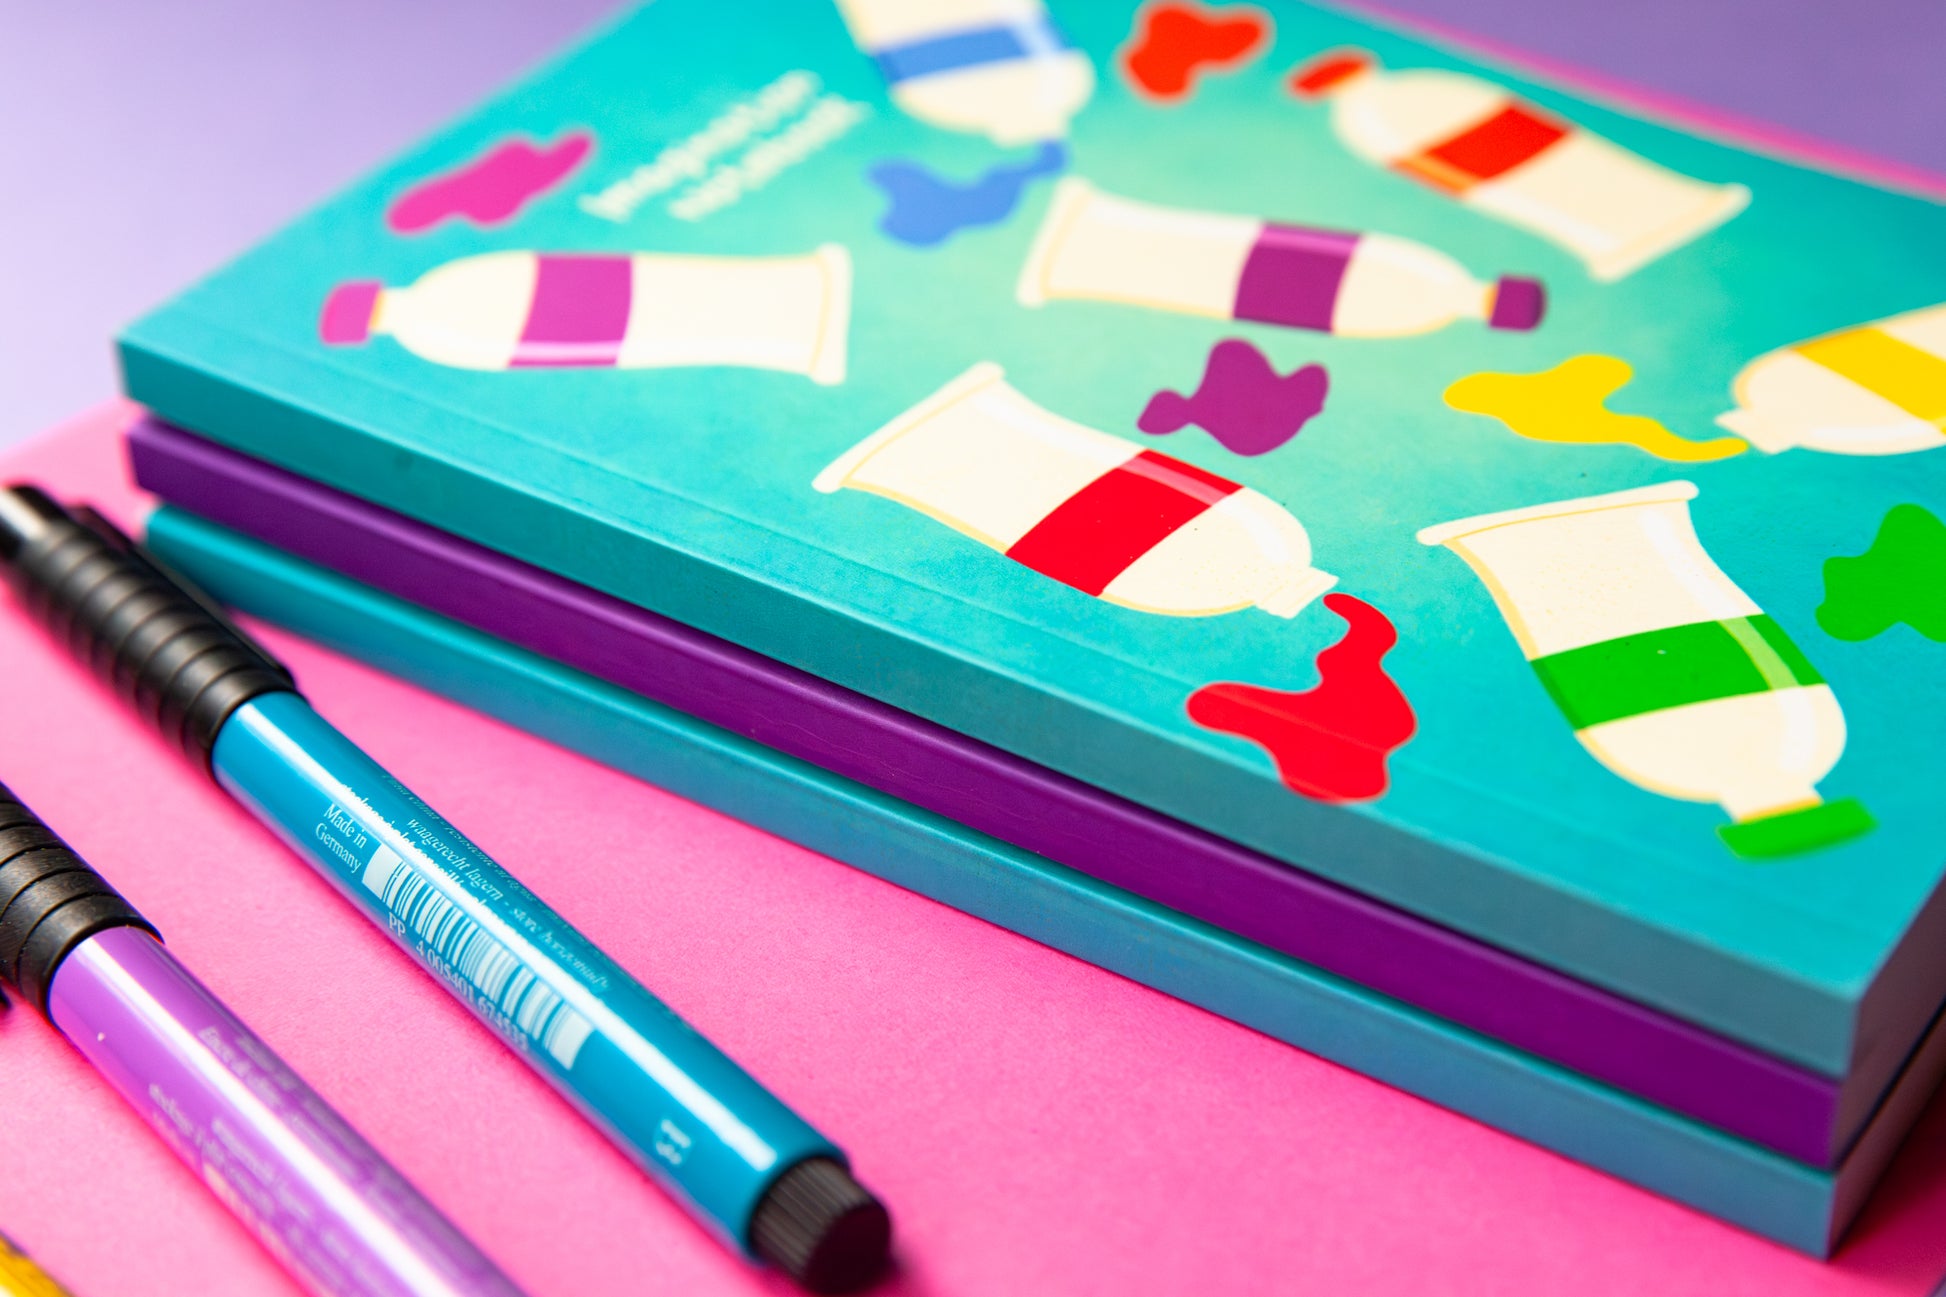 A teal notebook with an illustration of paint tubee and paint splotches in a rainbow of colours on the cover. It's sitting on top of  a stack of notebooks to show the thickness of the spine. The notebook sits on a colourful pink and purple back drop. Three markers in purple, teal  and  yellow sit next to the notebook